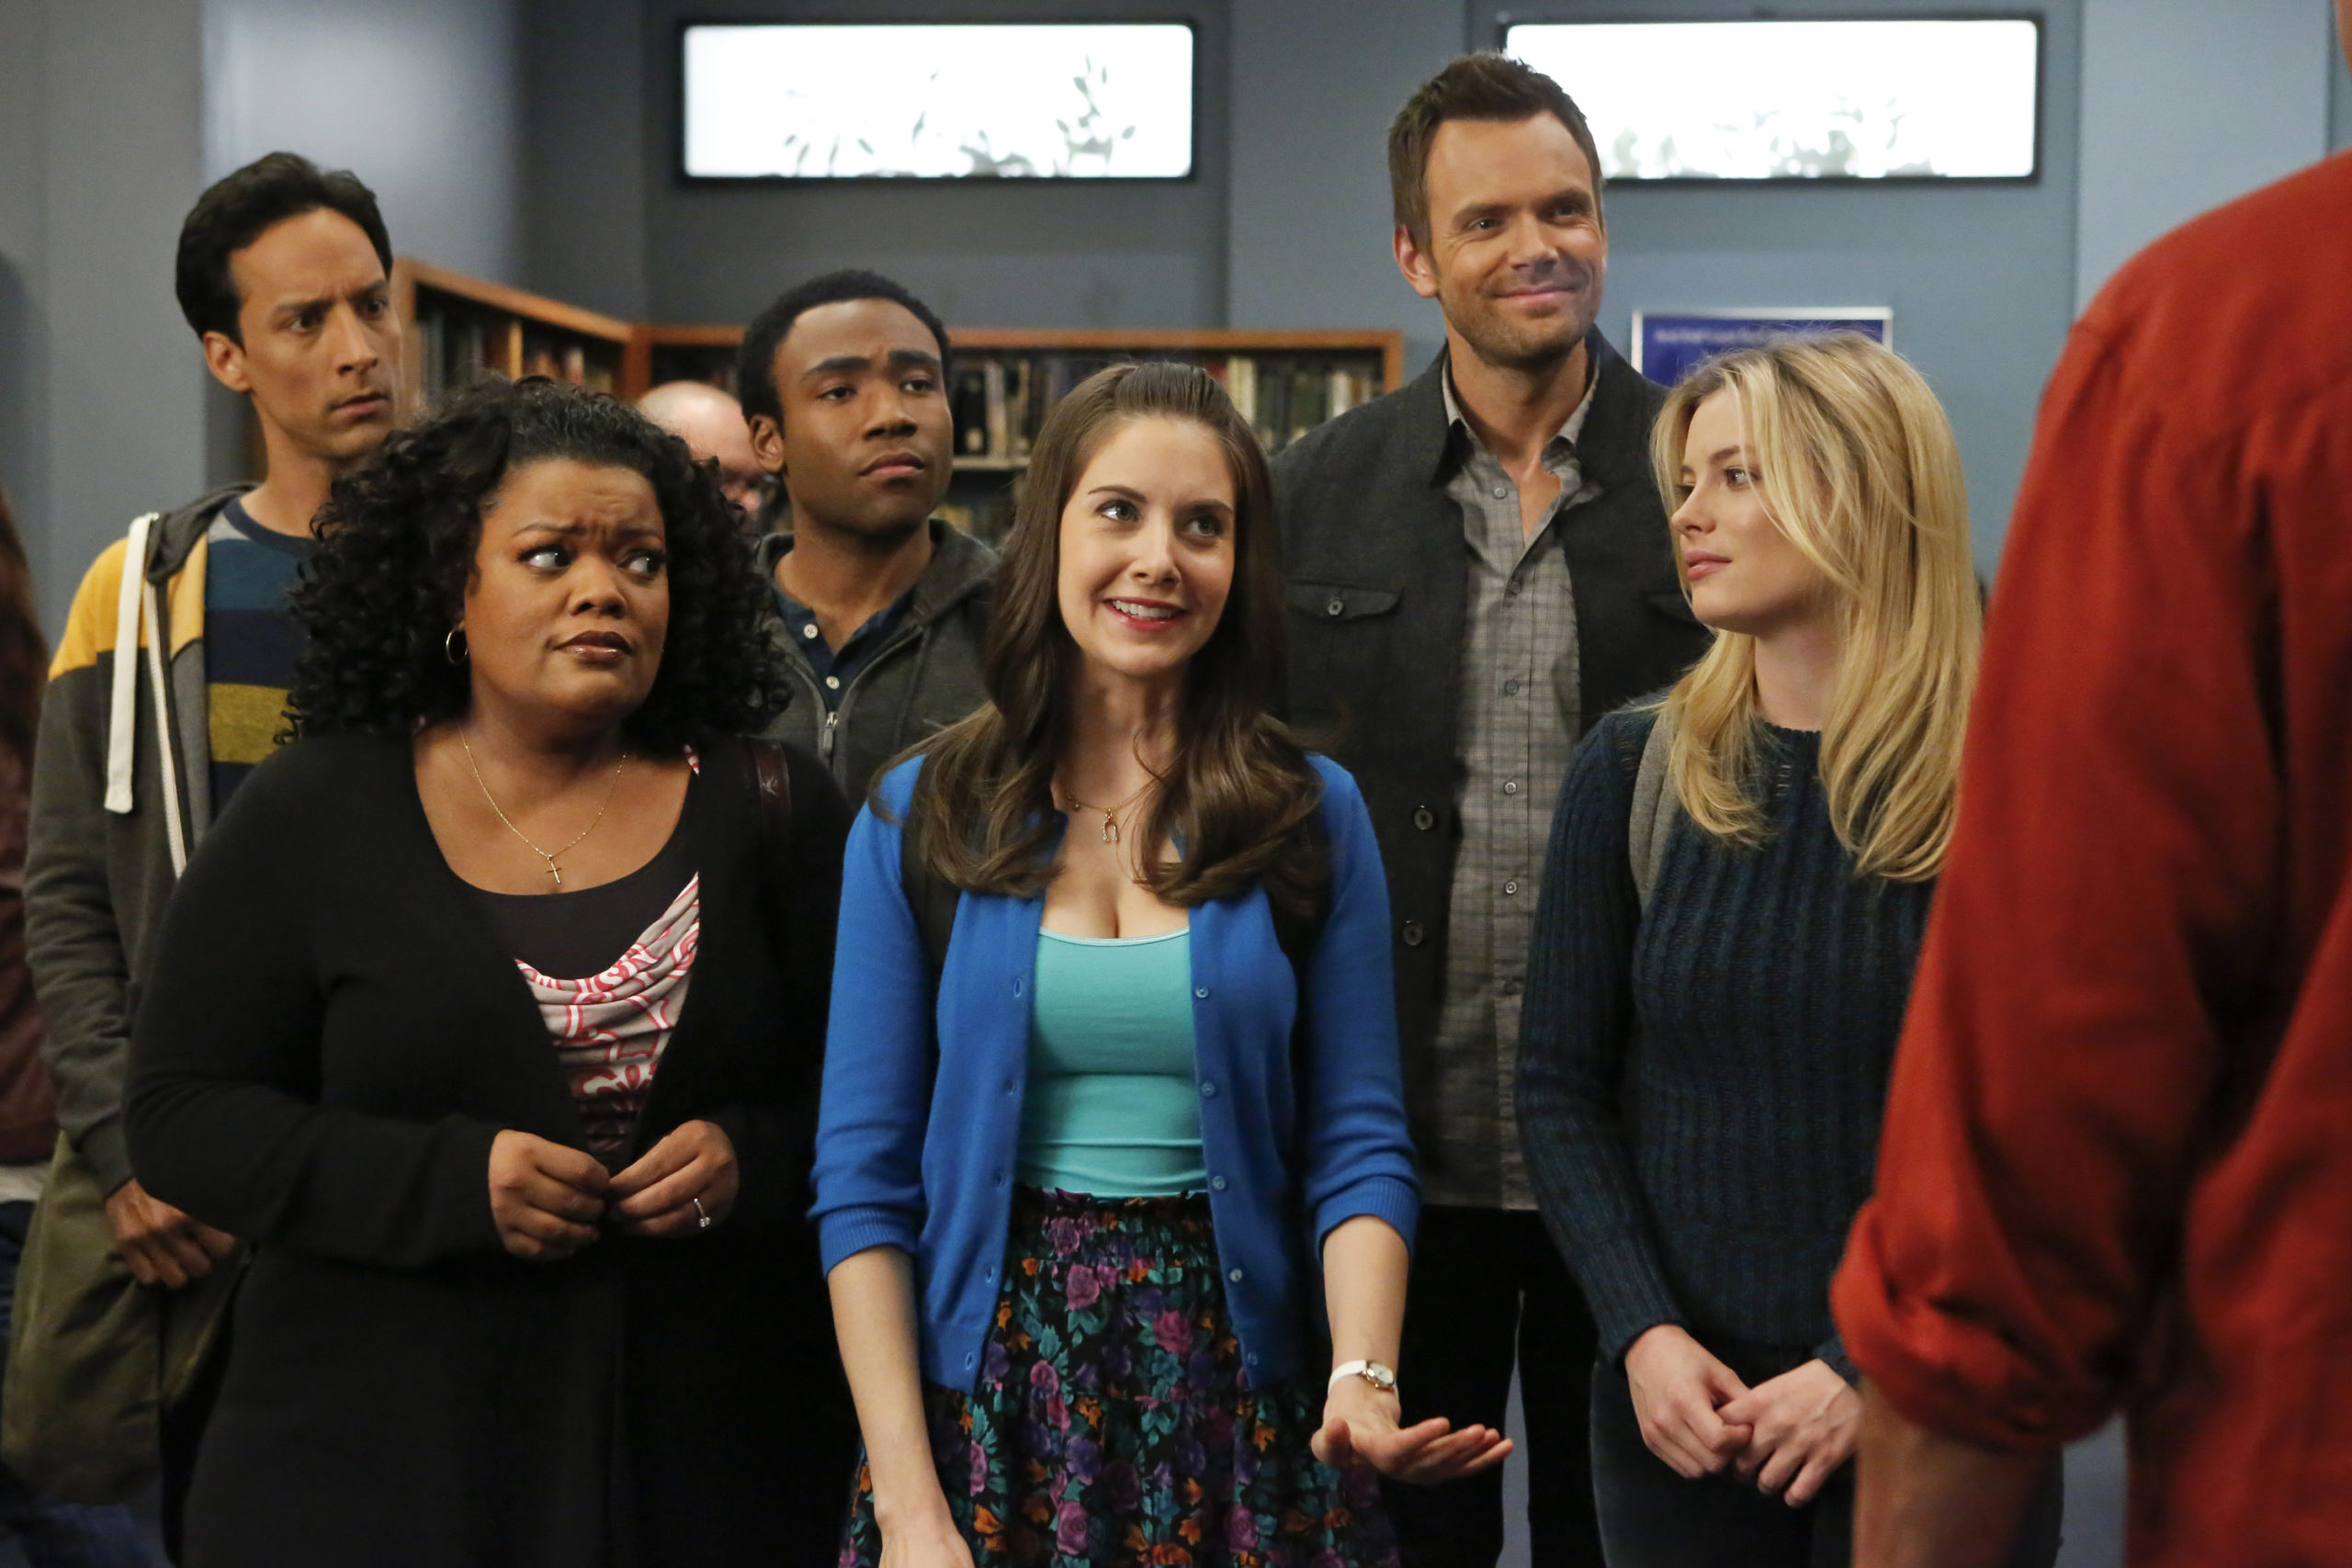 COMMUNITY -- "Basic Human Anatomy" Episode 410 -- Pictured: (l-r) Danny Pudi as Abed, Yvette Nicole...